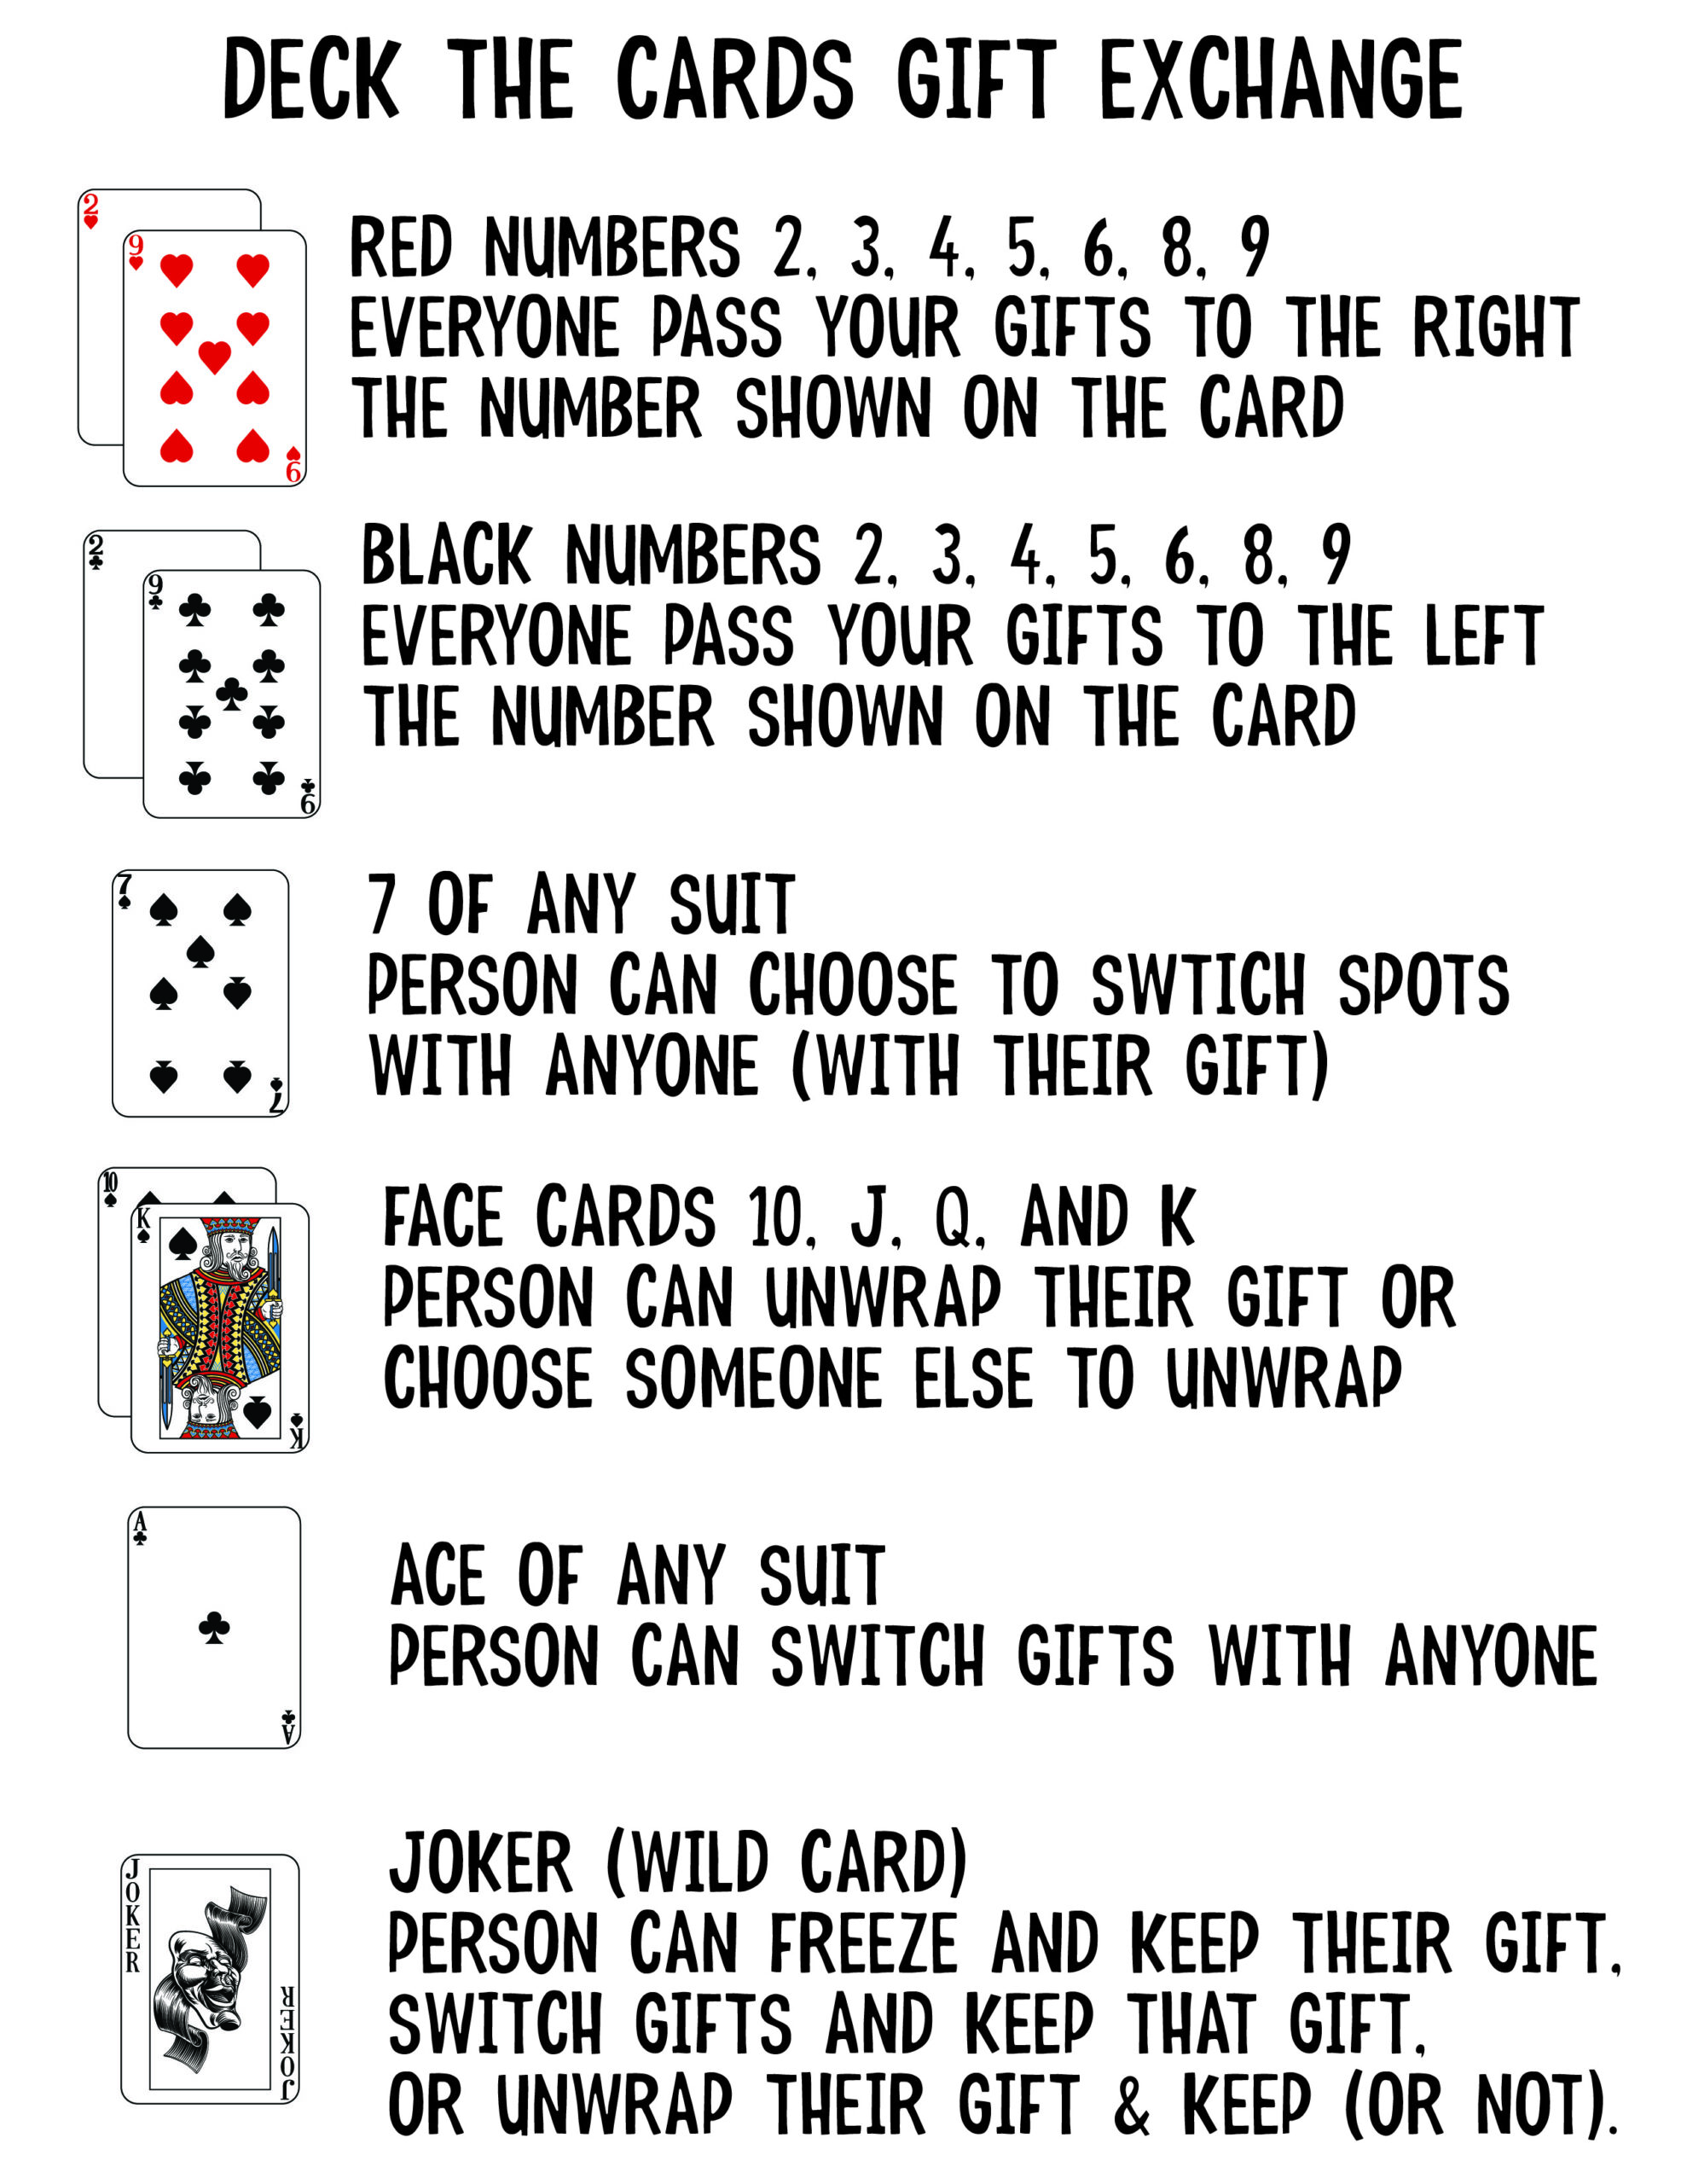 Deck of Cards Gift Exchange Game - Play Party Plan